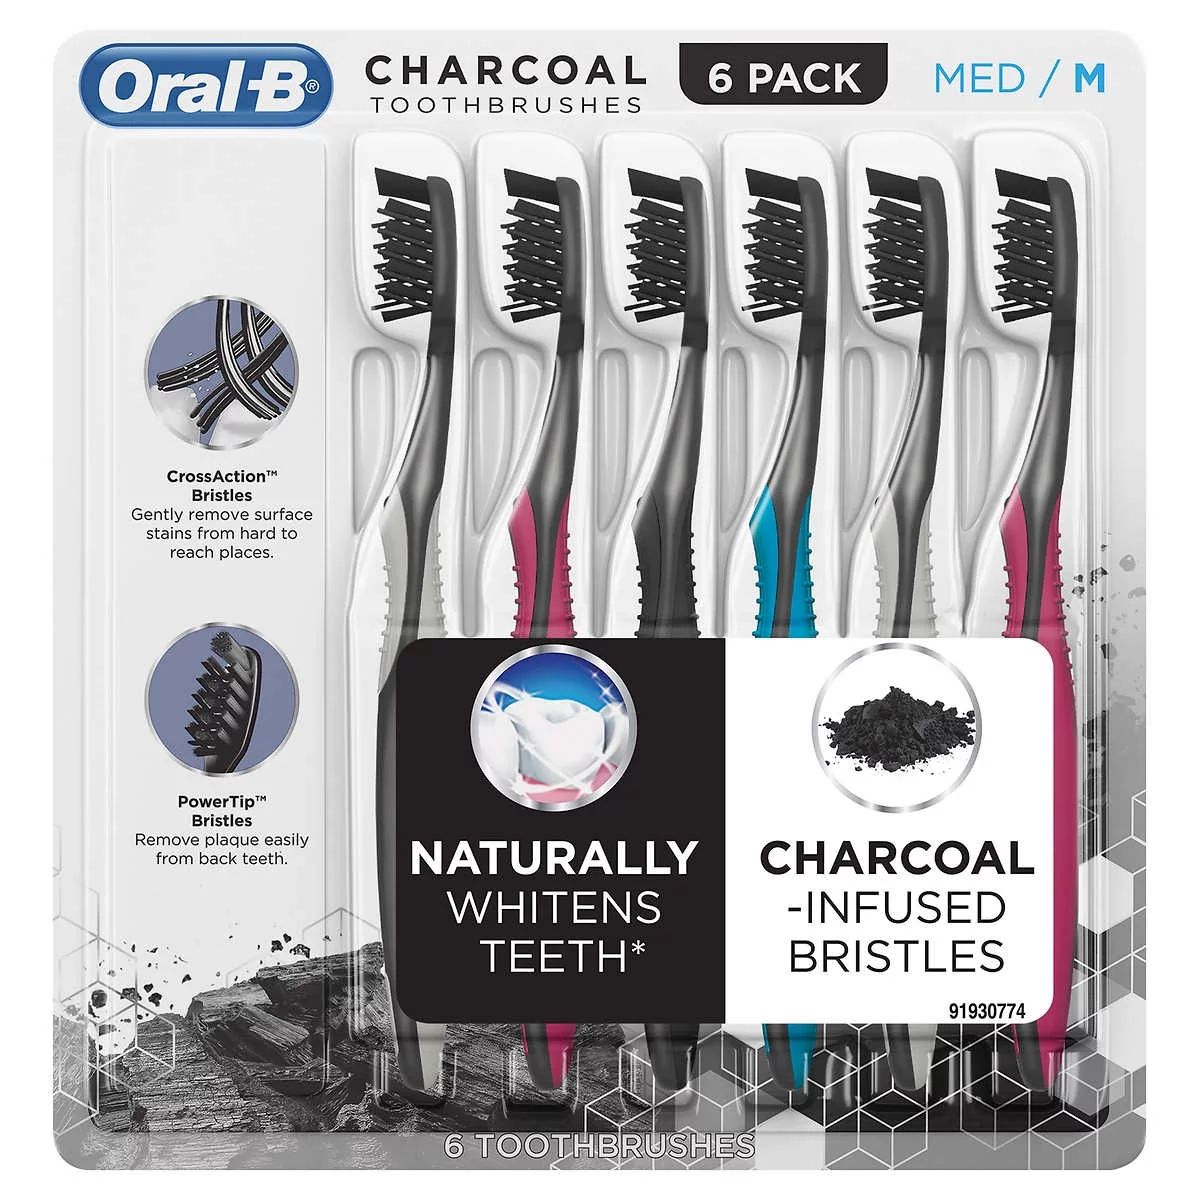 Oral-B Charcoal Toothbrush, Medium (Pack of 6)